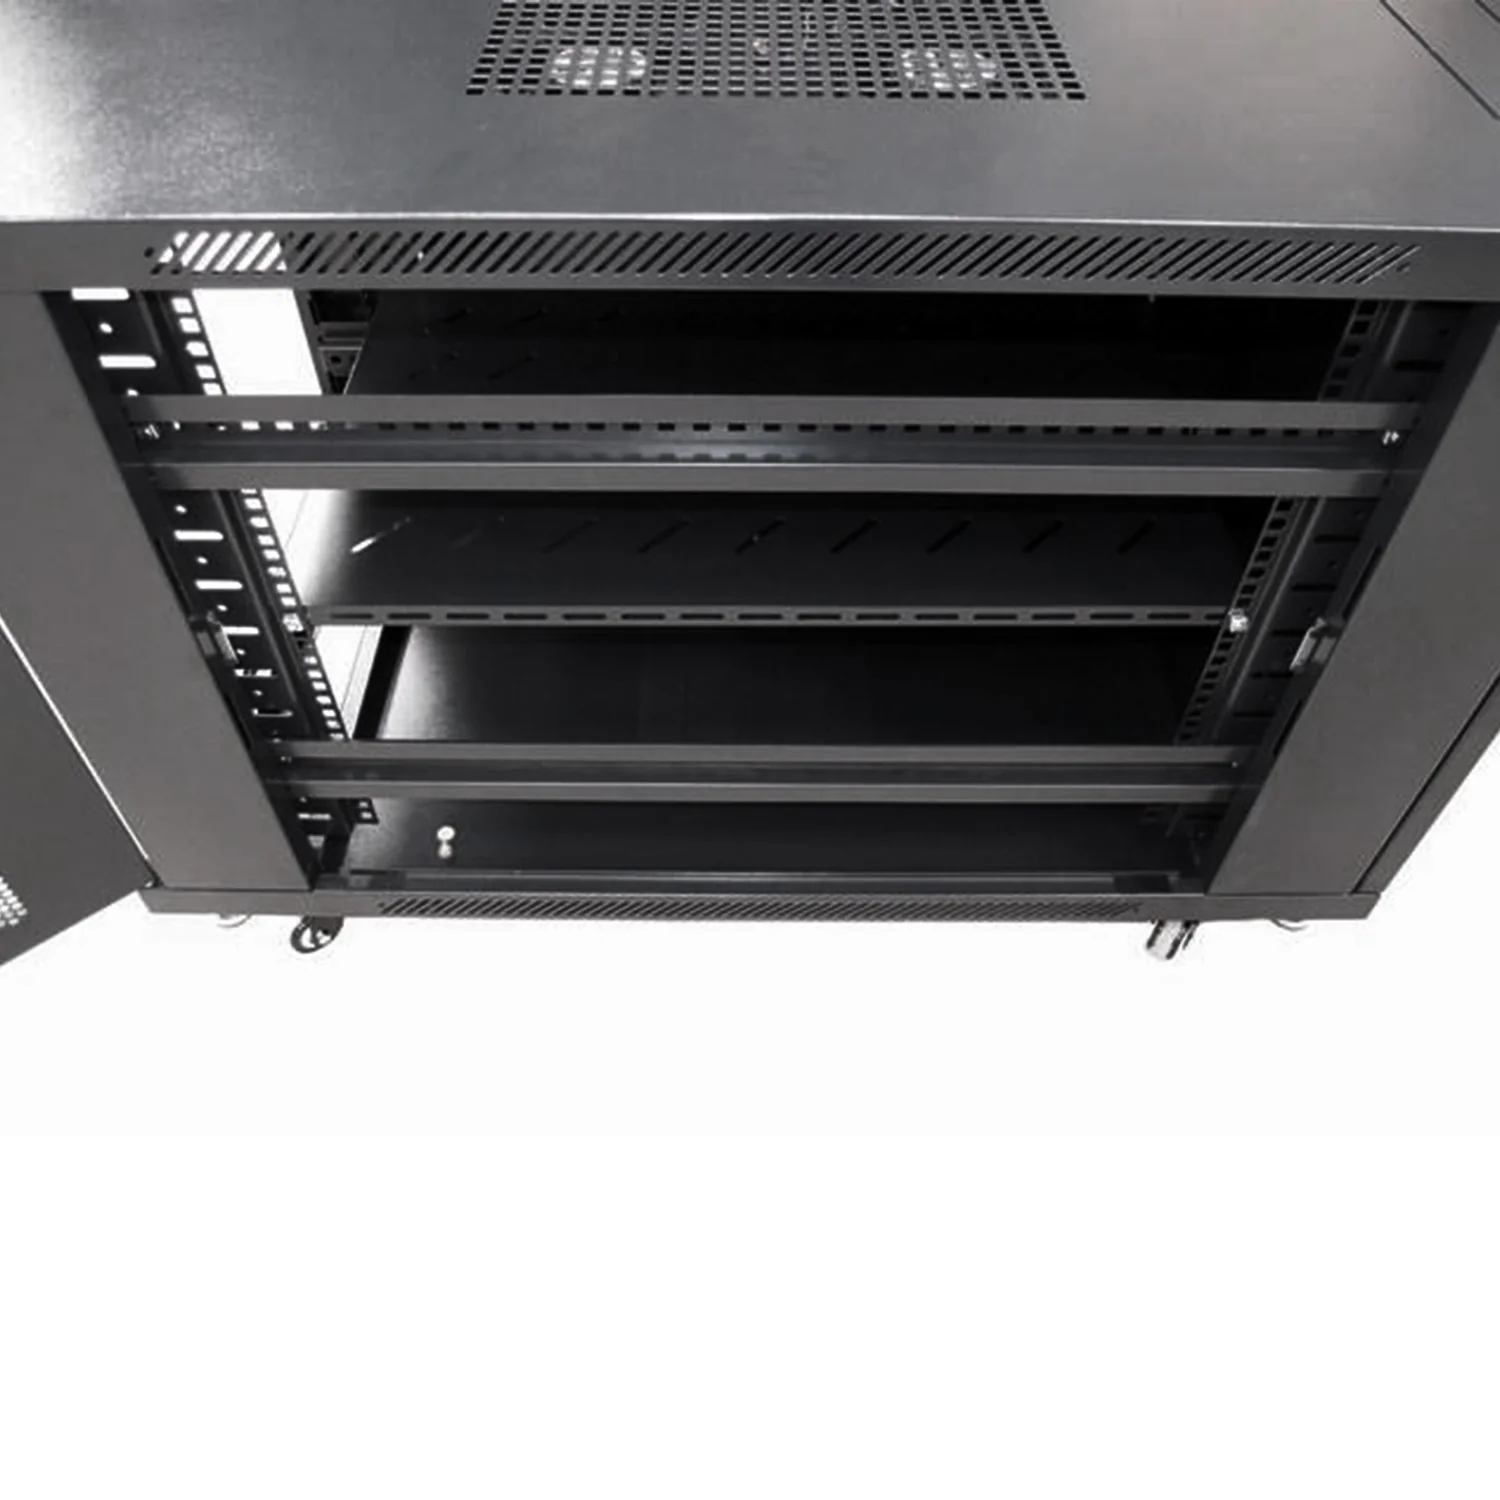 Server Rack 19 600x1000 26 Units Black Evolution series - Network Cabinet  Rack - Rack Cabinets and Accessories - Networking